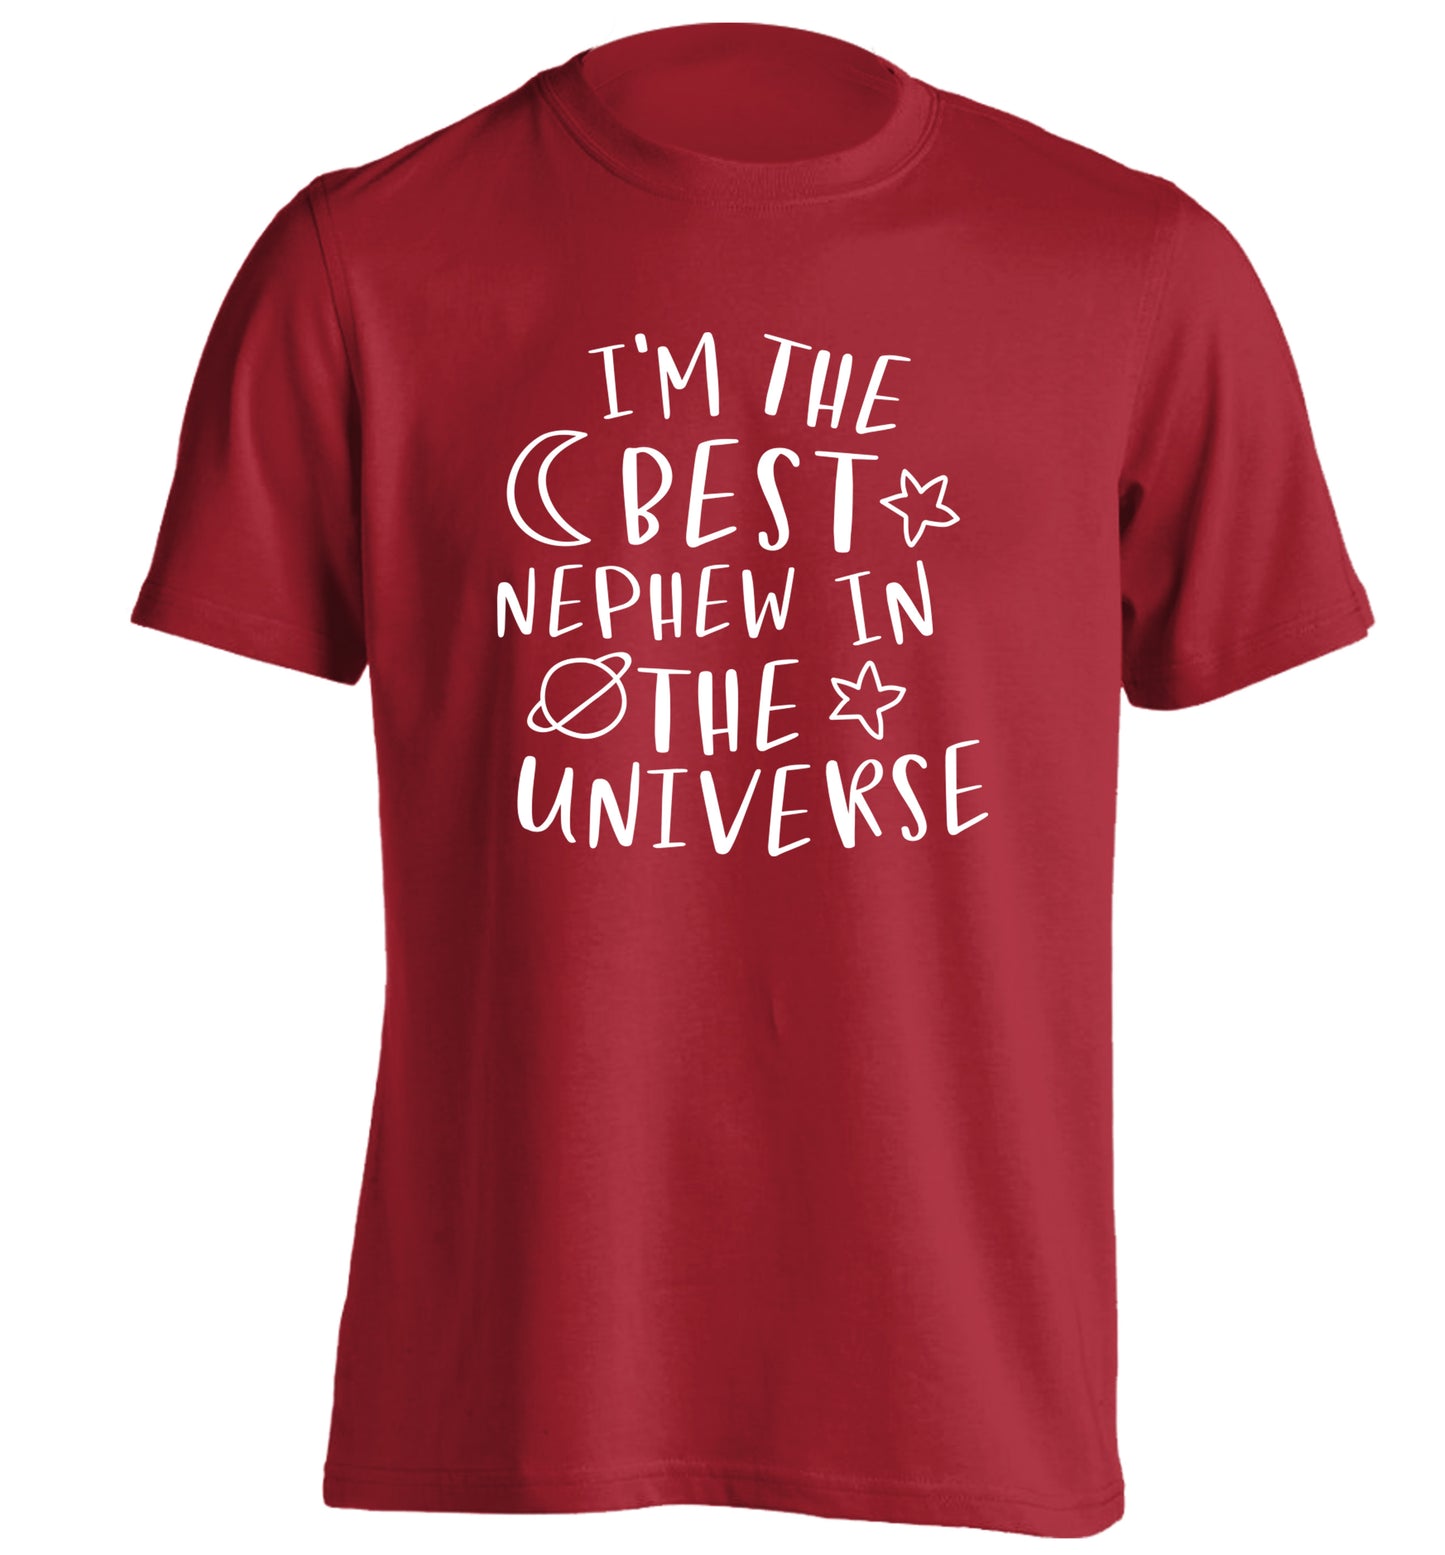 I'm the best nephew in the universe adults unisex red Tshirt 2XL